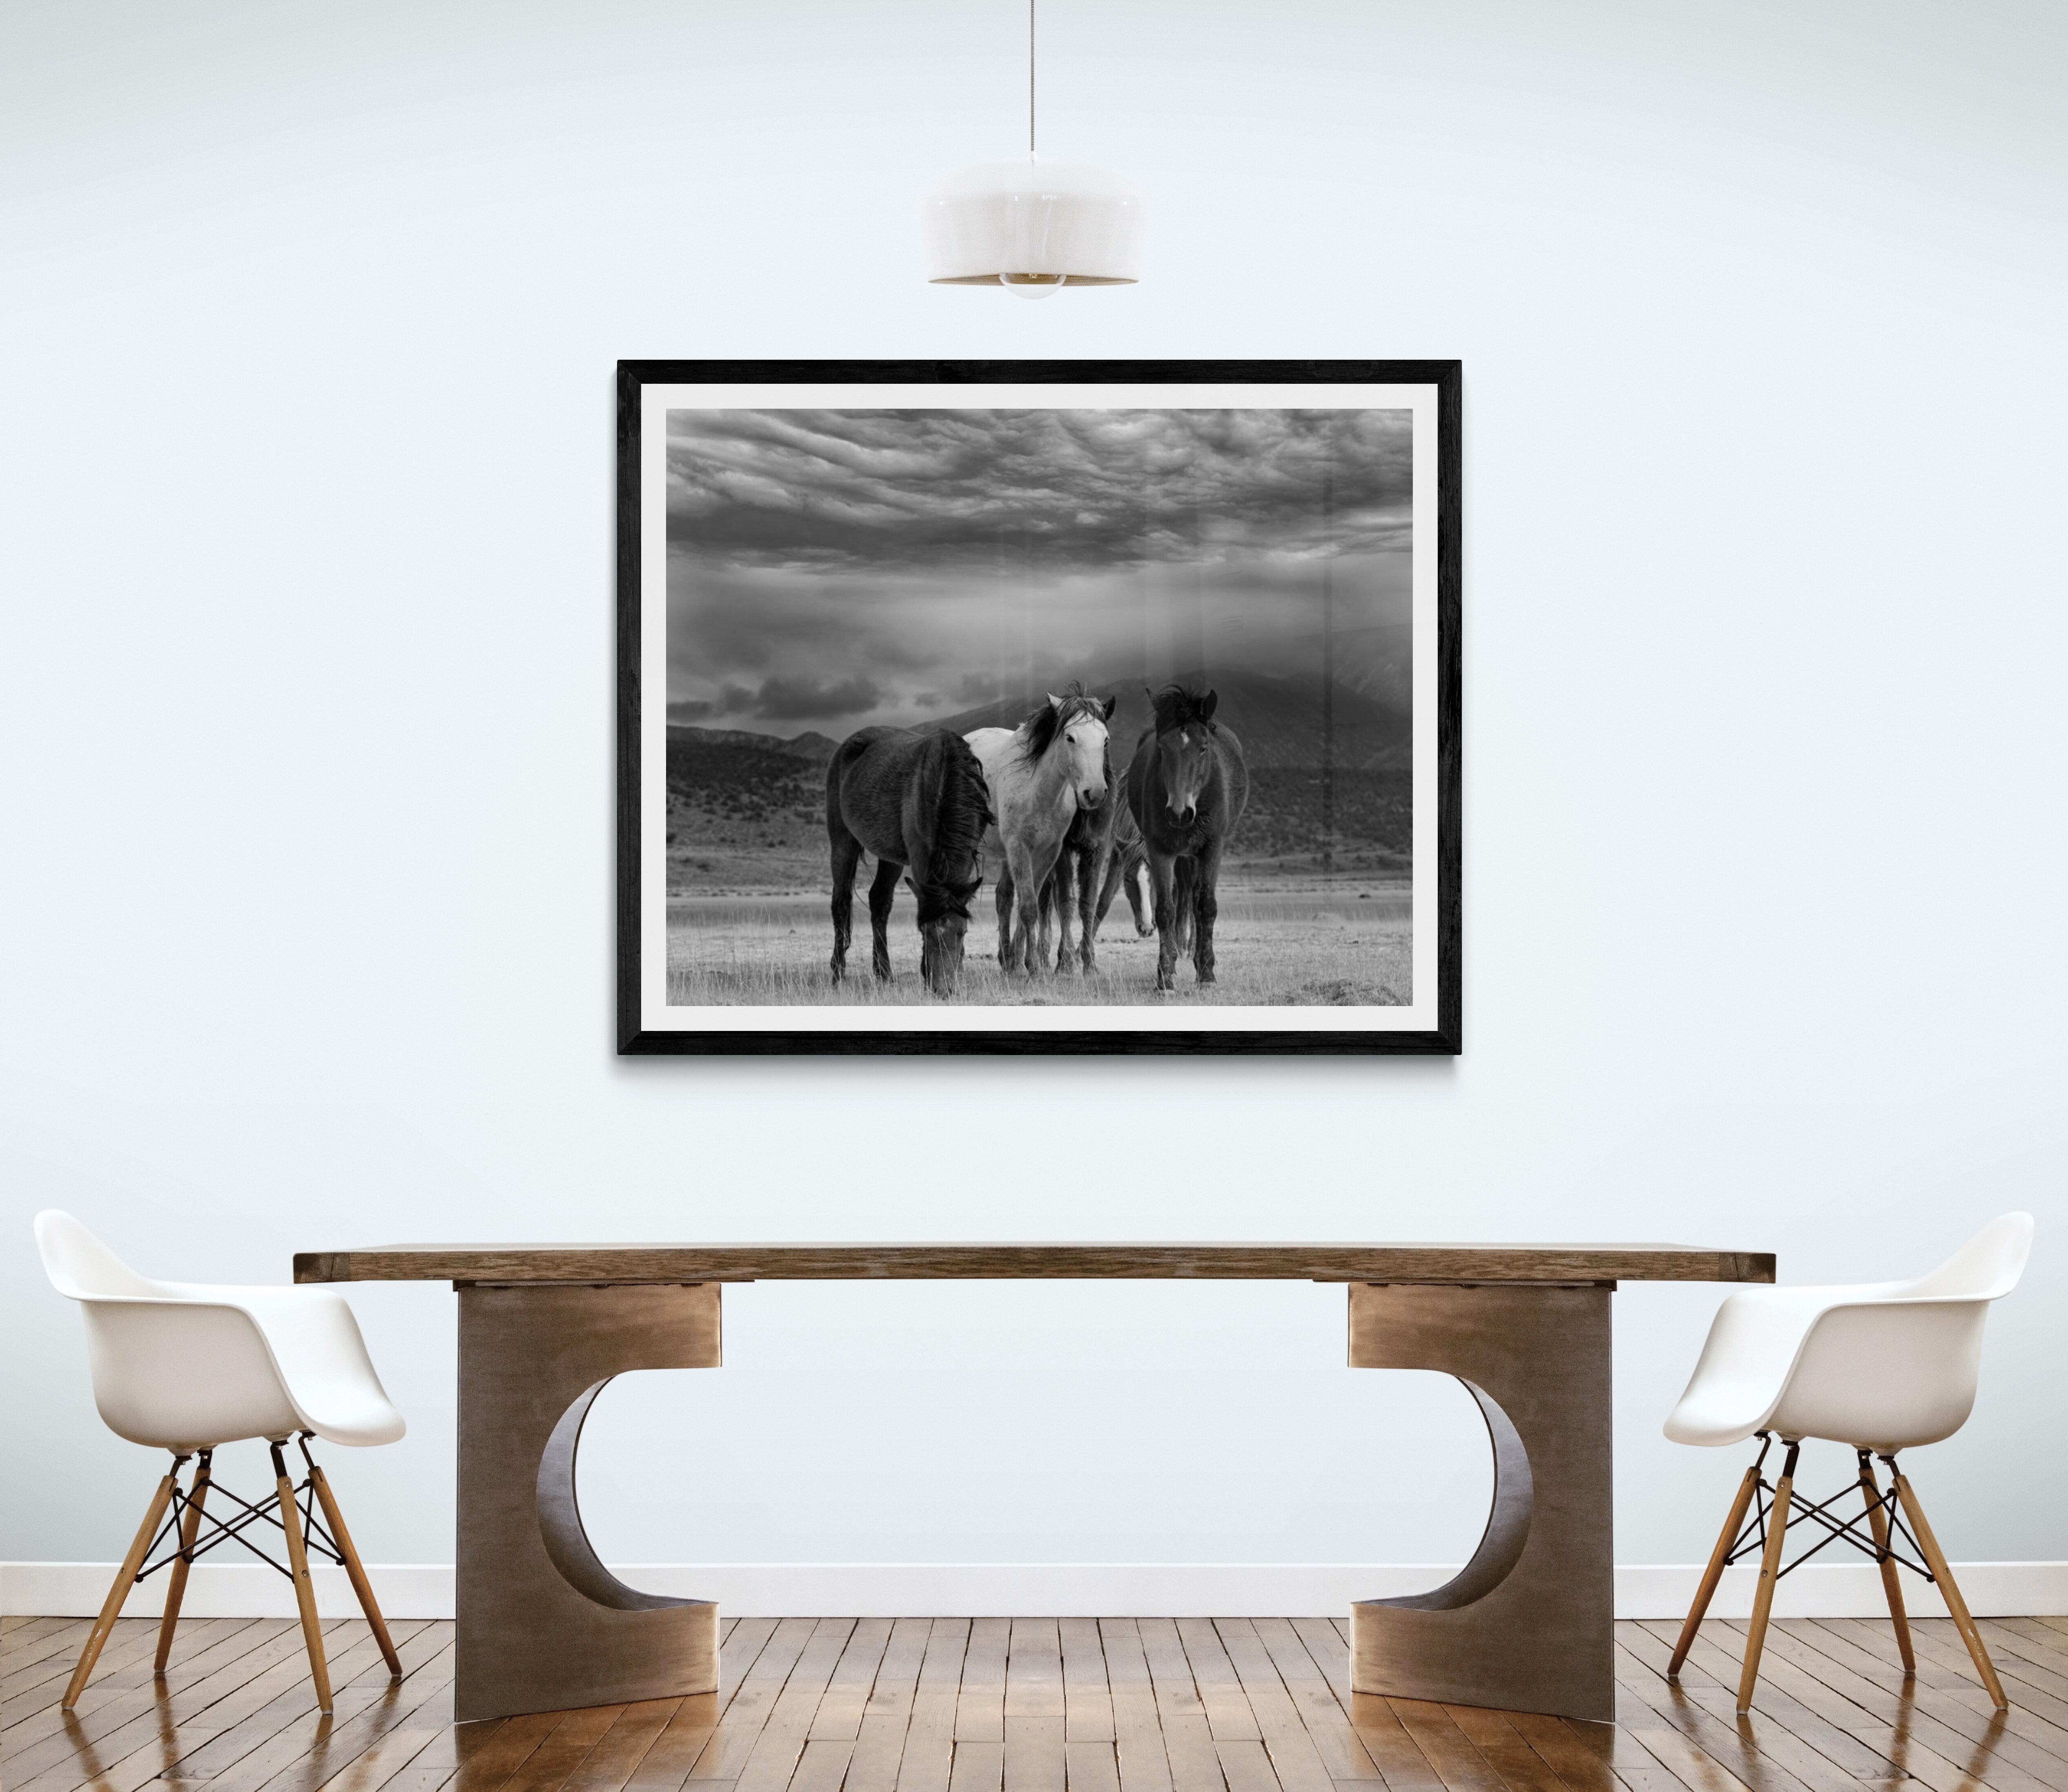 Dust & Horses 40x50 Black and White Photography Wild Horses, Mustangs, Unsigned - Print by Shane Russeck